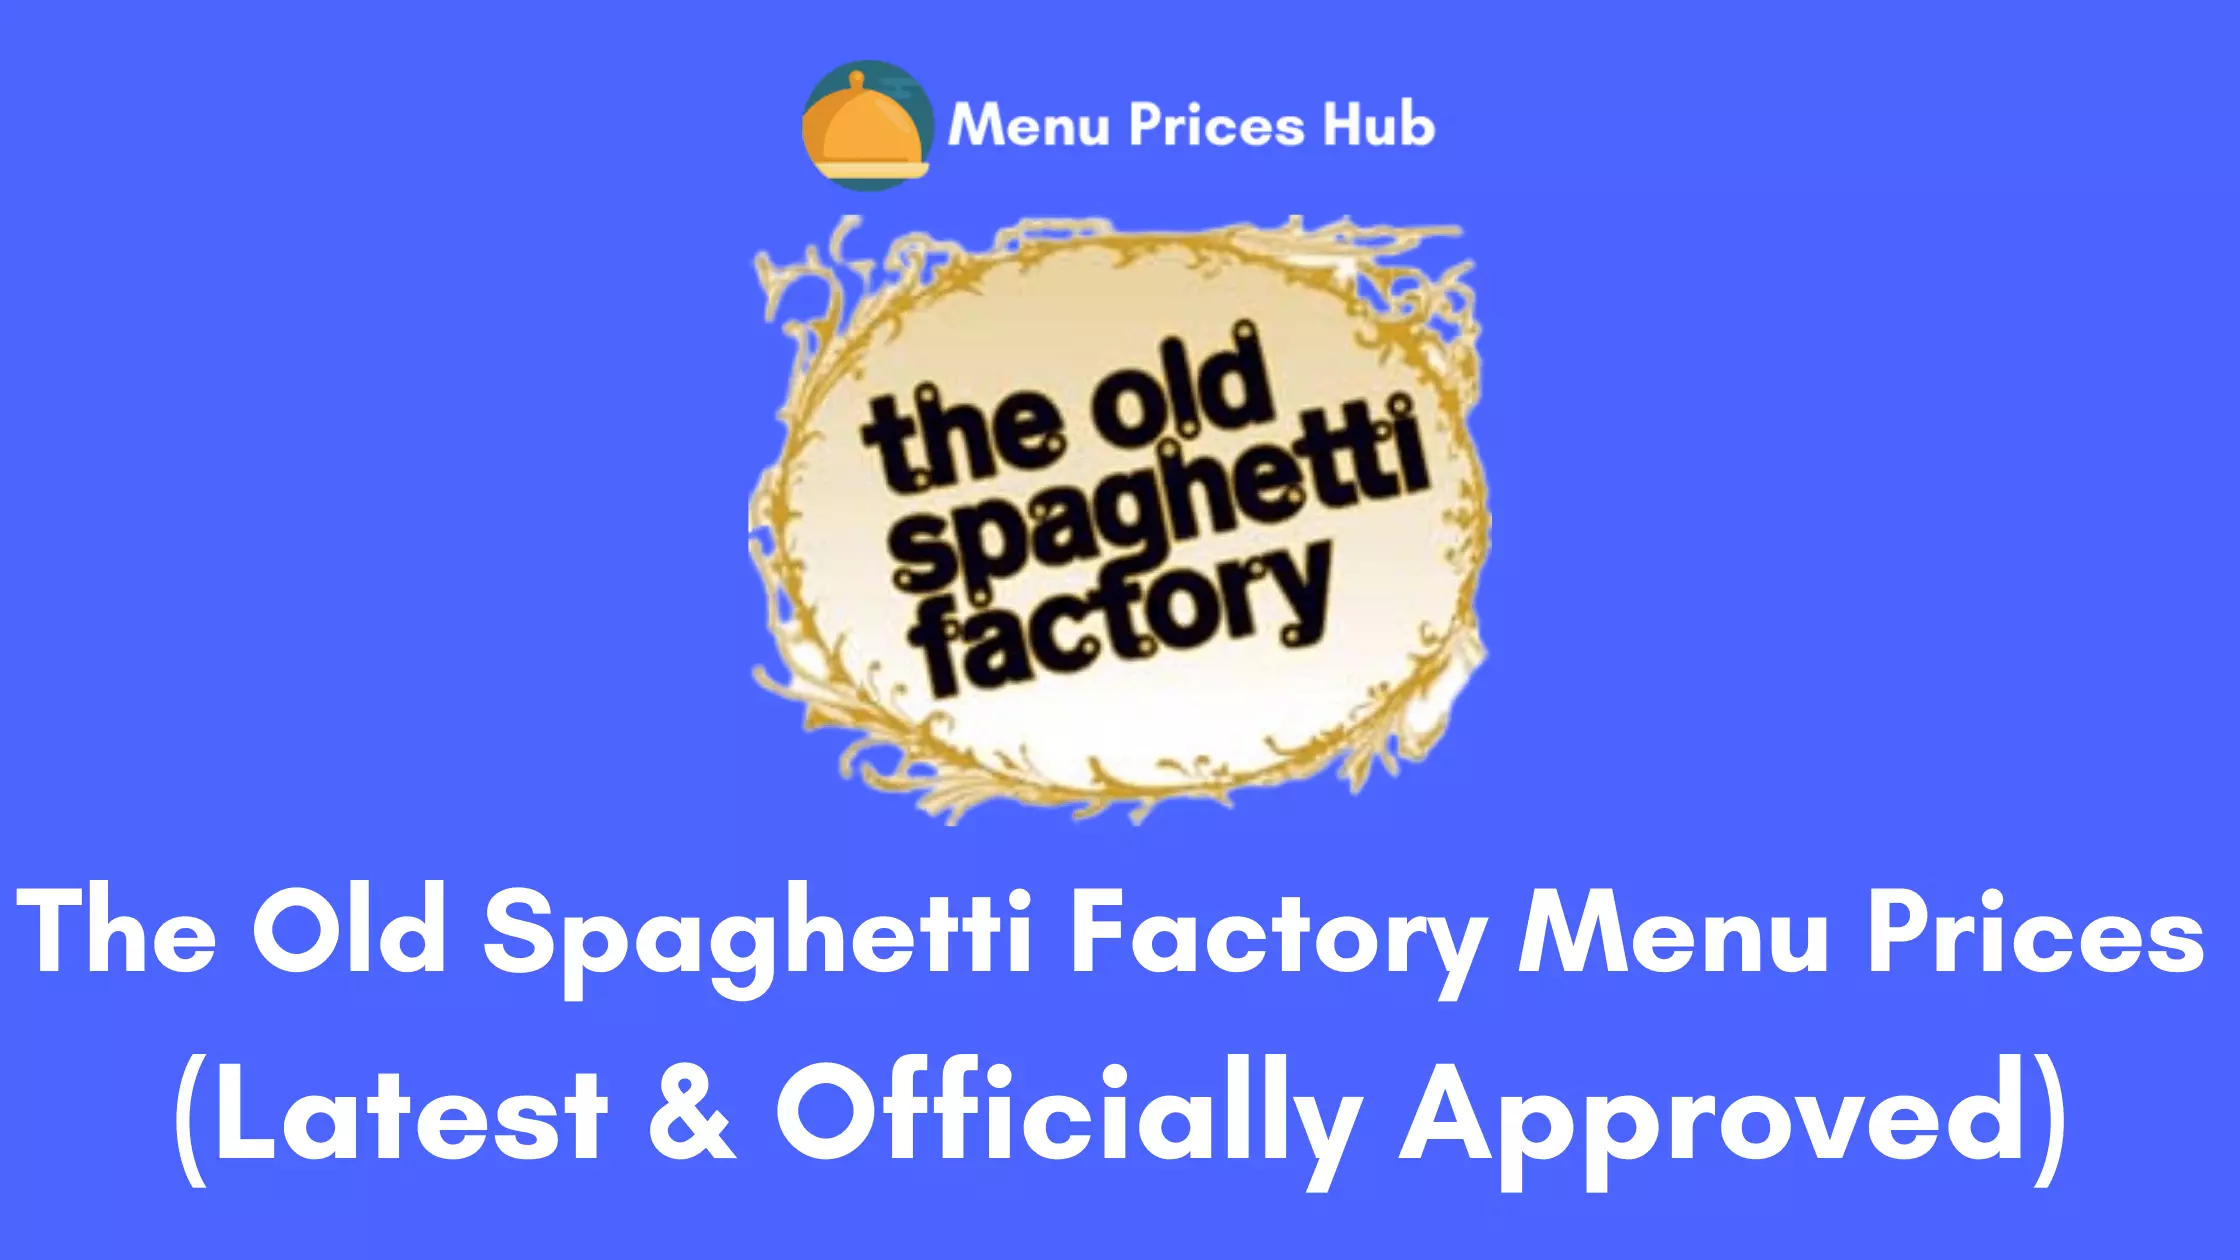 The Old Spaghetti Factory Menu Prices